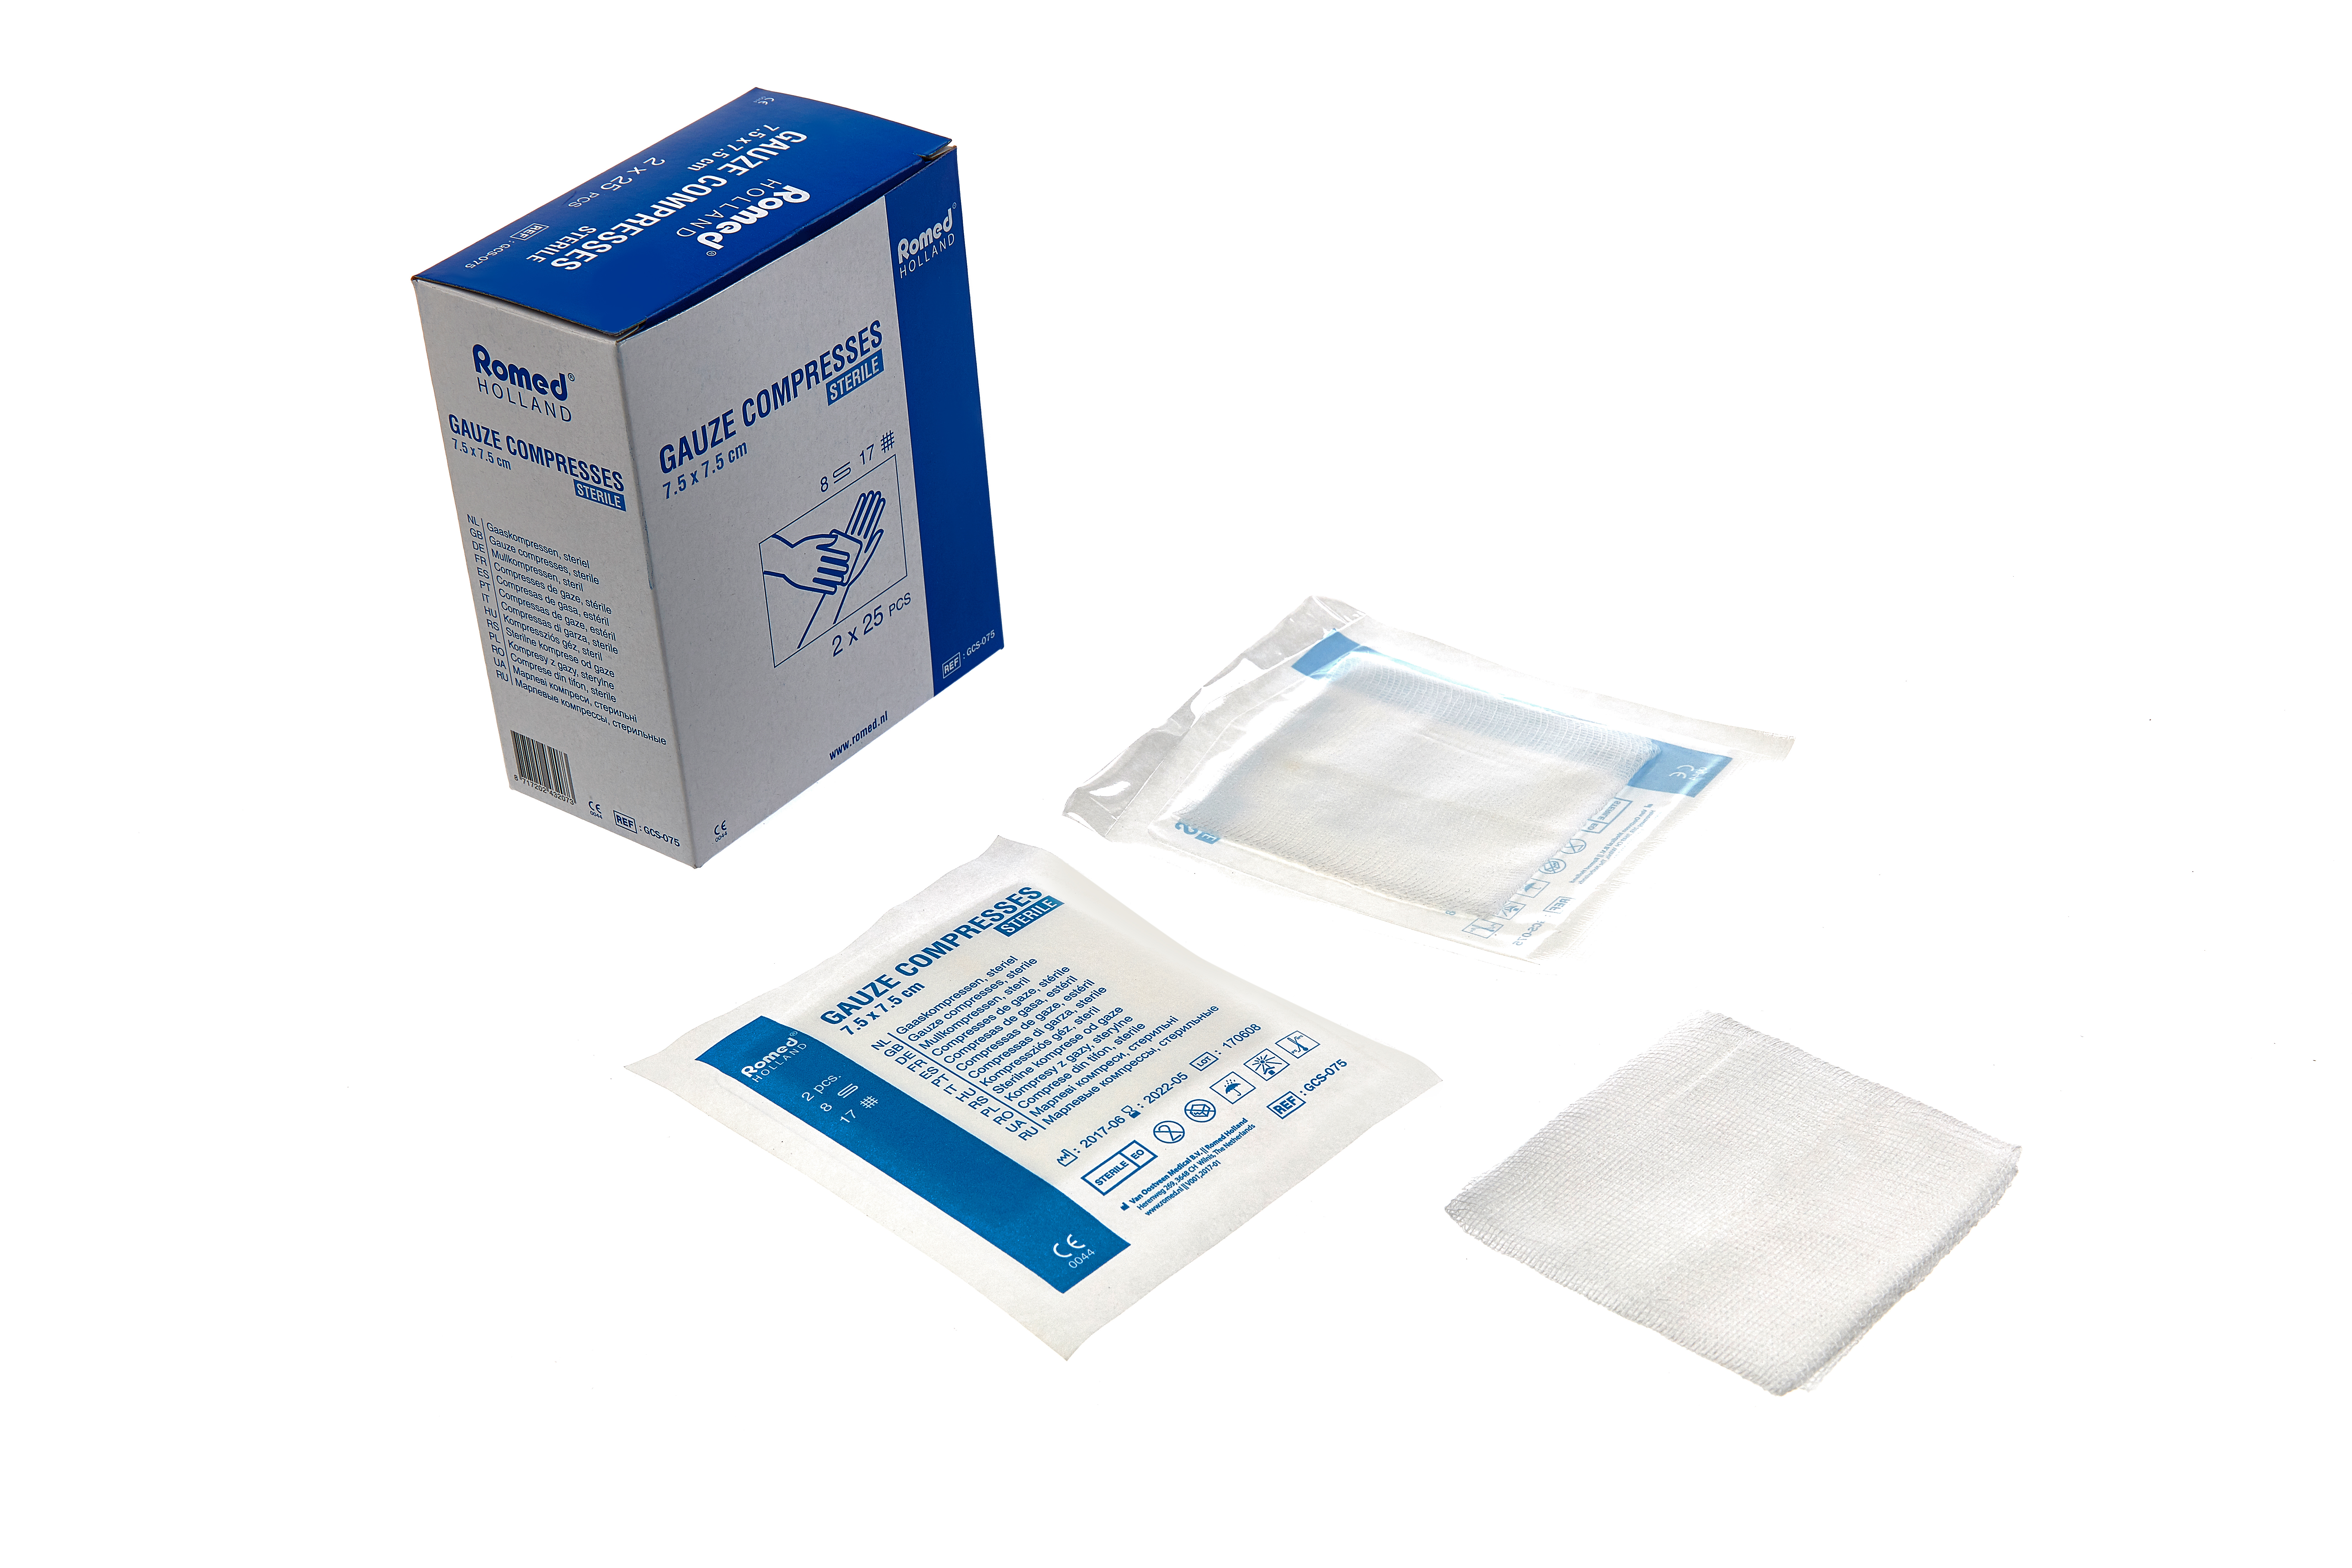 GCS-050 Romed gauze compresses, sterile, 17 threads, 8 ply, per 2 pcs in a pack, 5 x 5cm, 25 packs in an inner box, 100 boxes = 2.500 packs per carton.